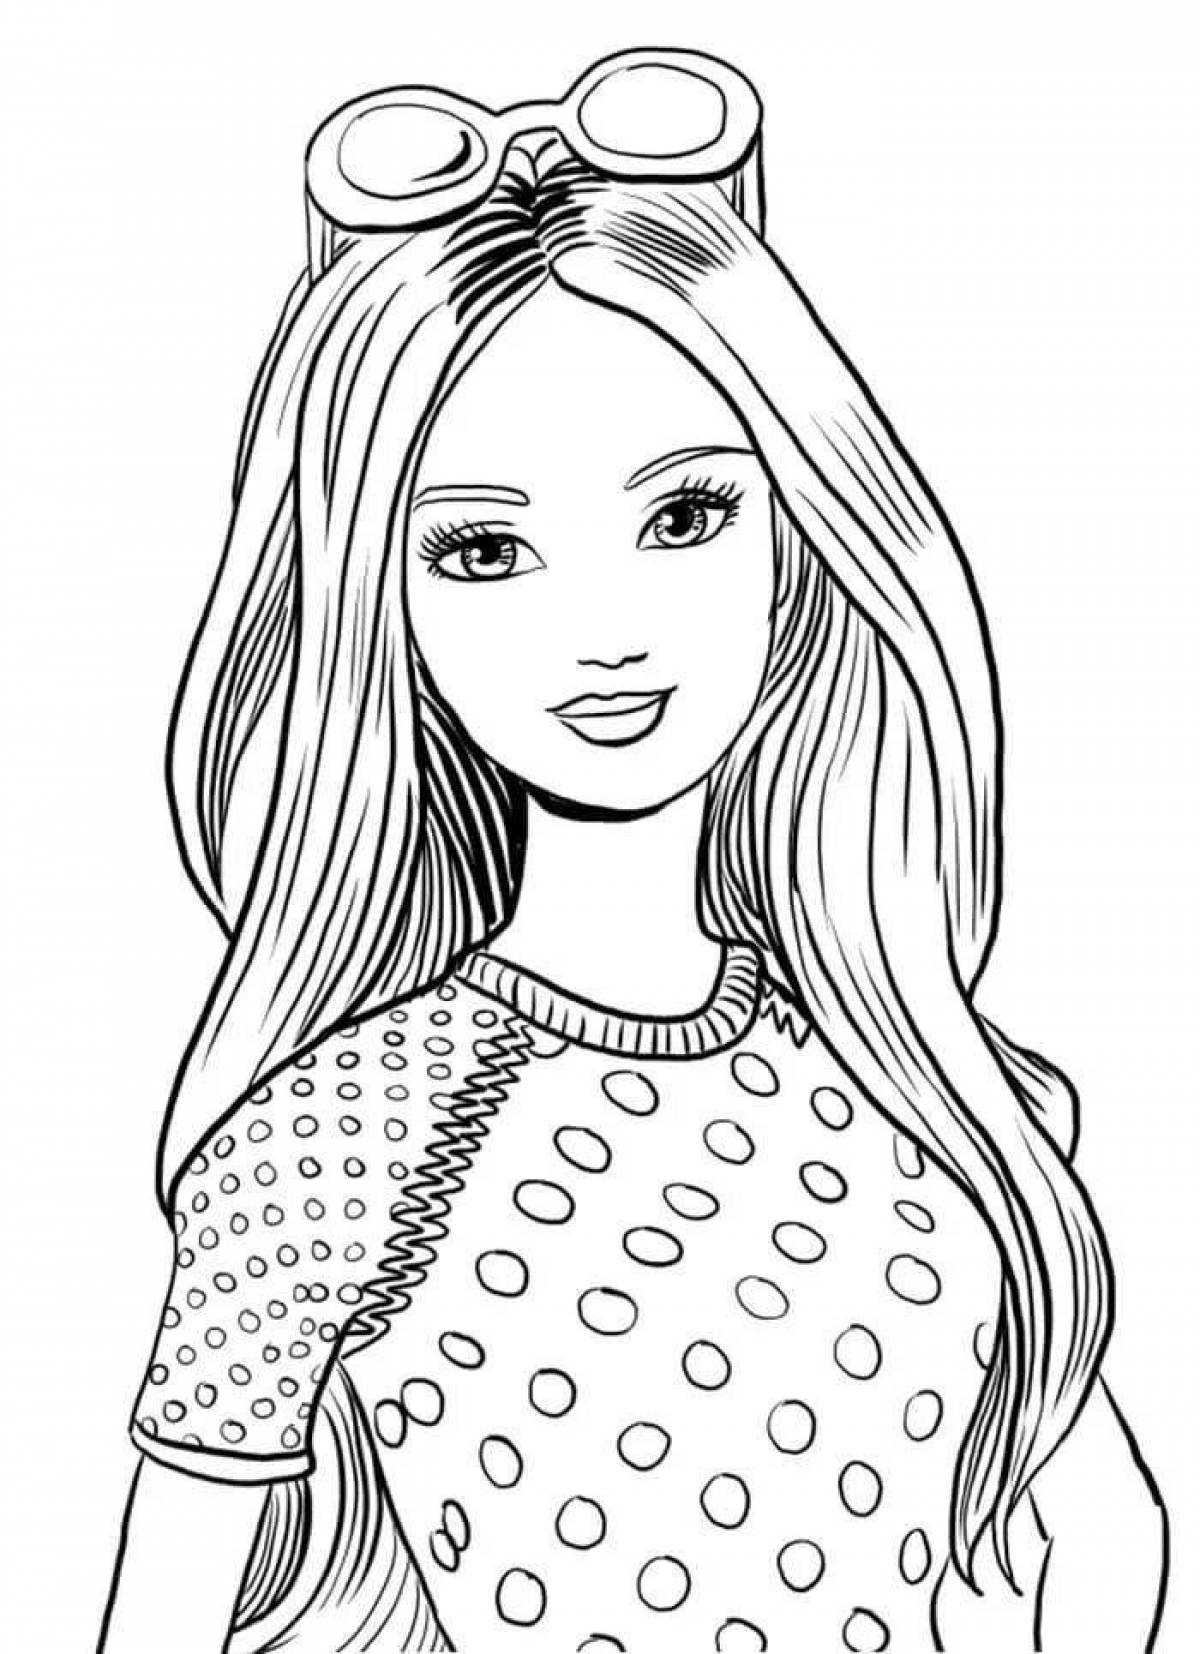 Coloring page wild fashionista